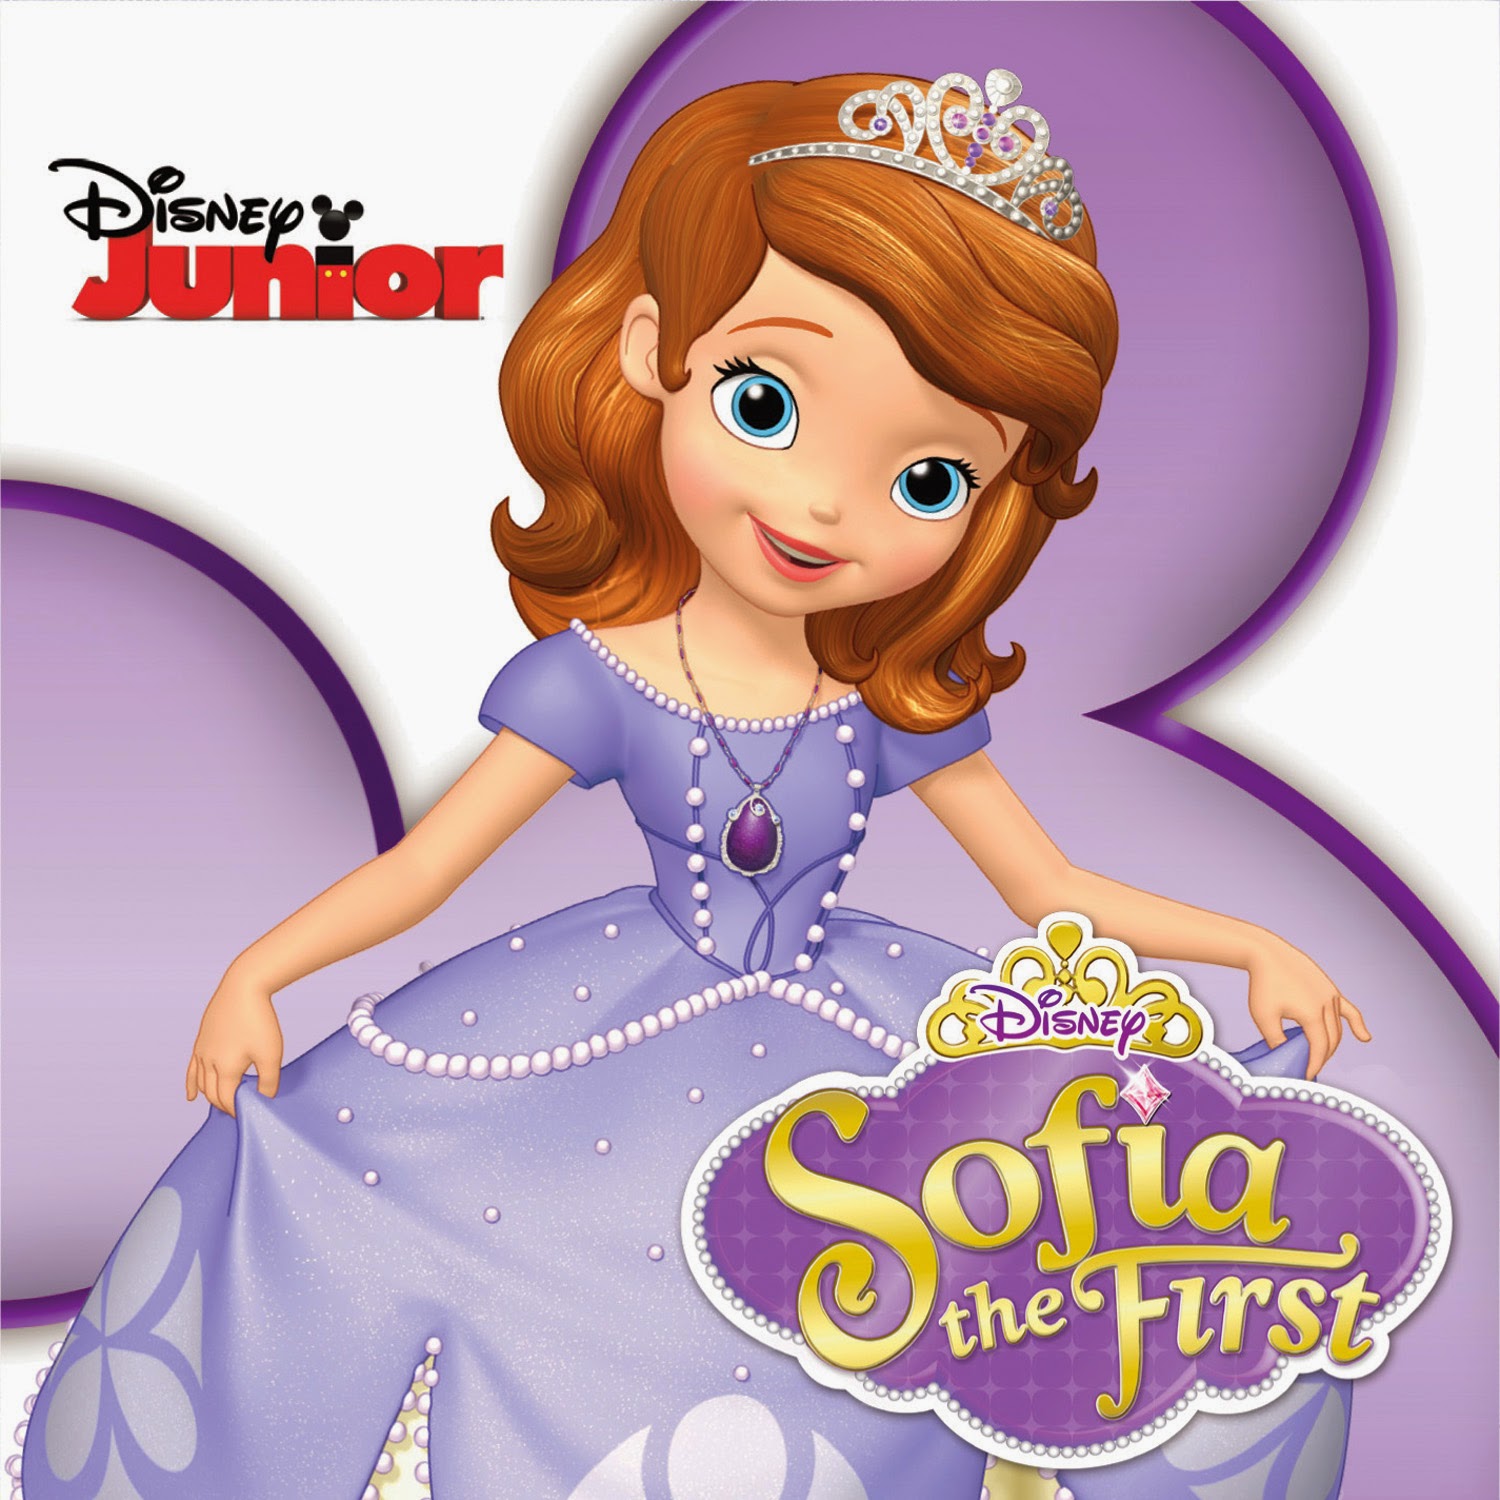 Sofia The First Wallpaper - Sofia The First , HD Wallpaper & Backgrounds